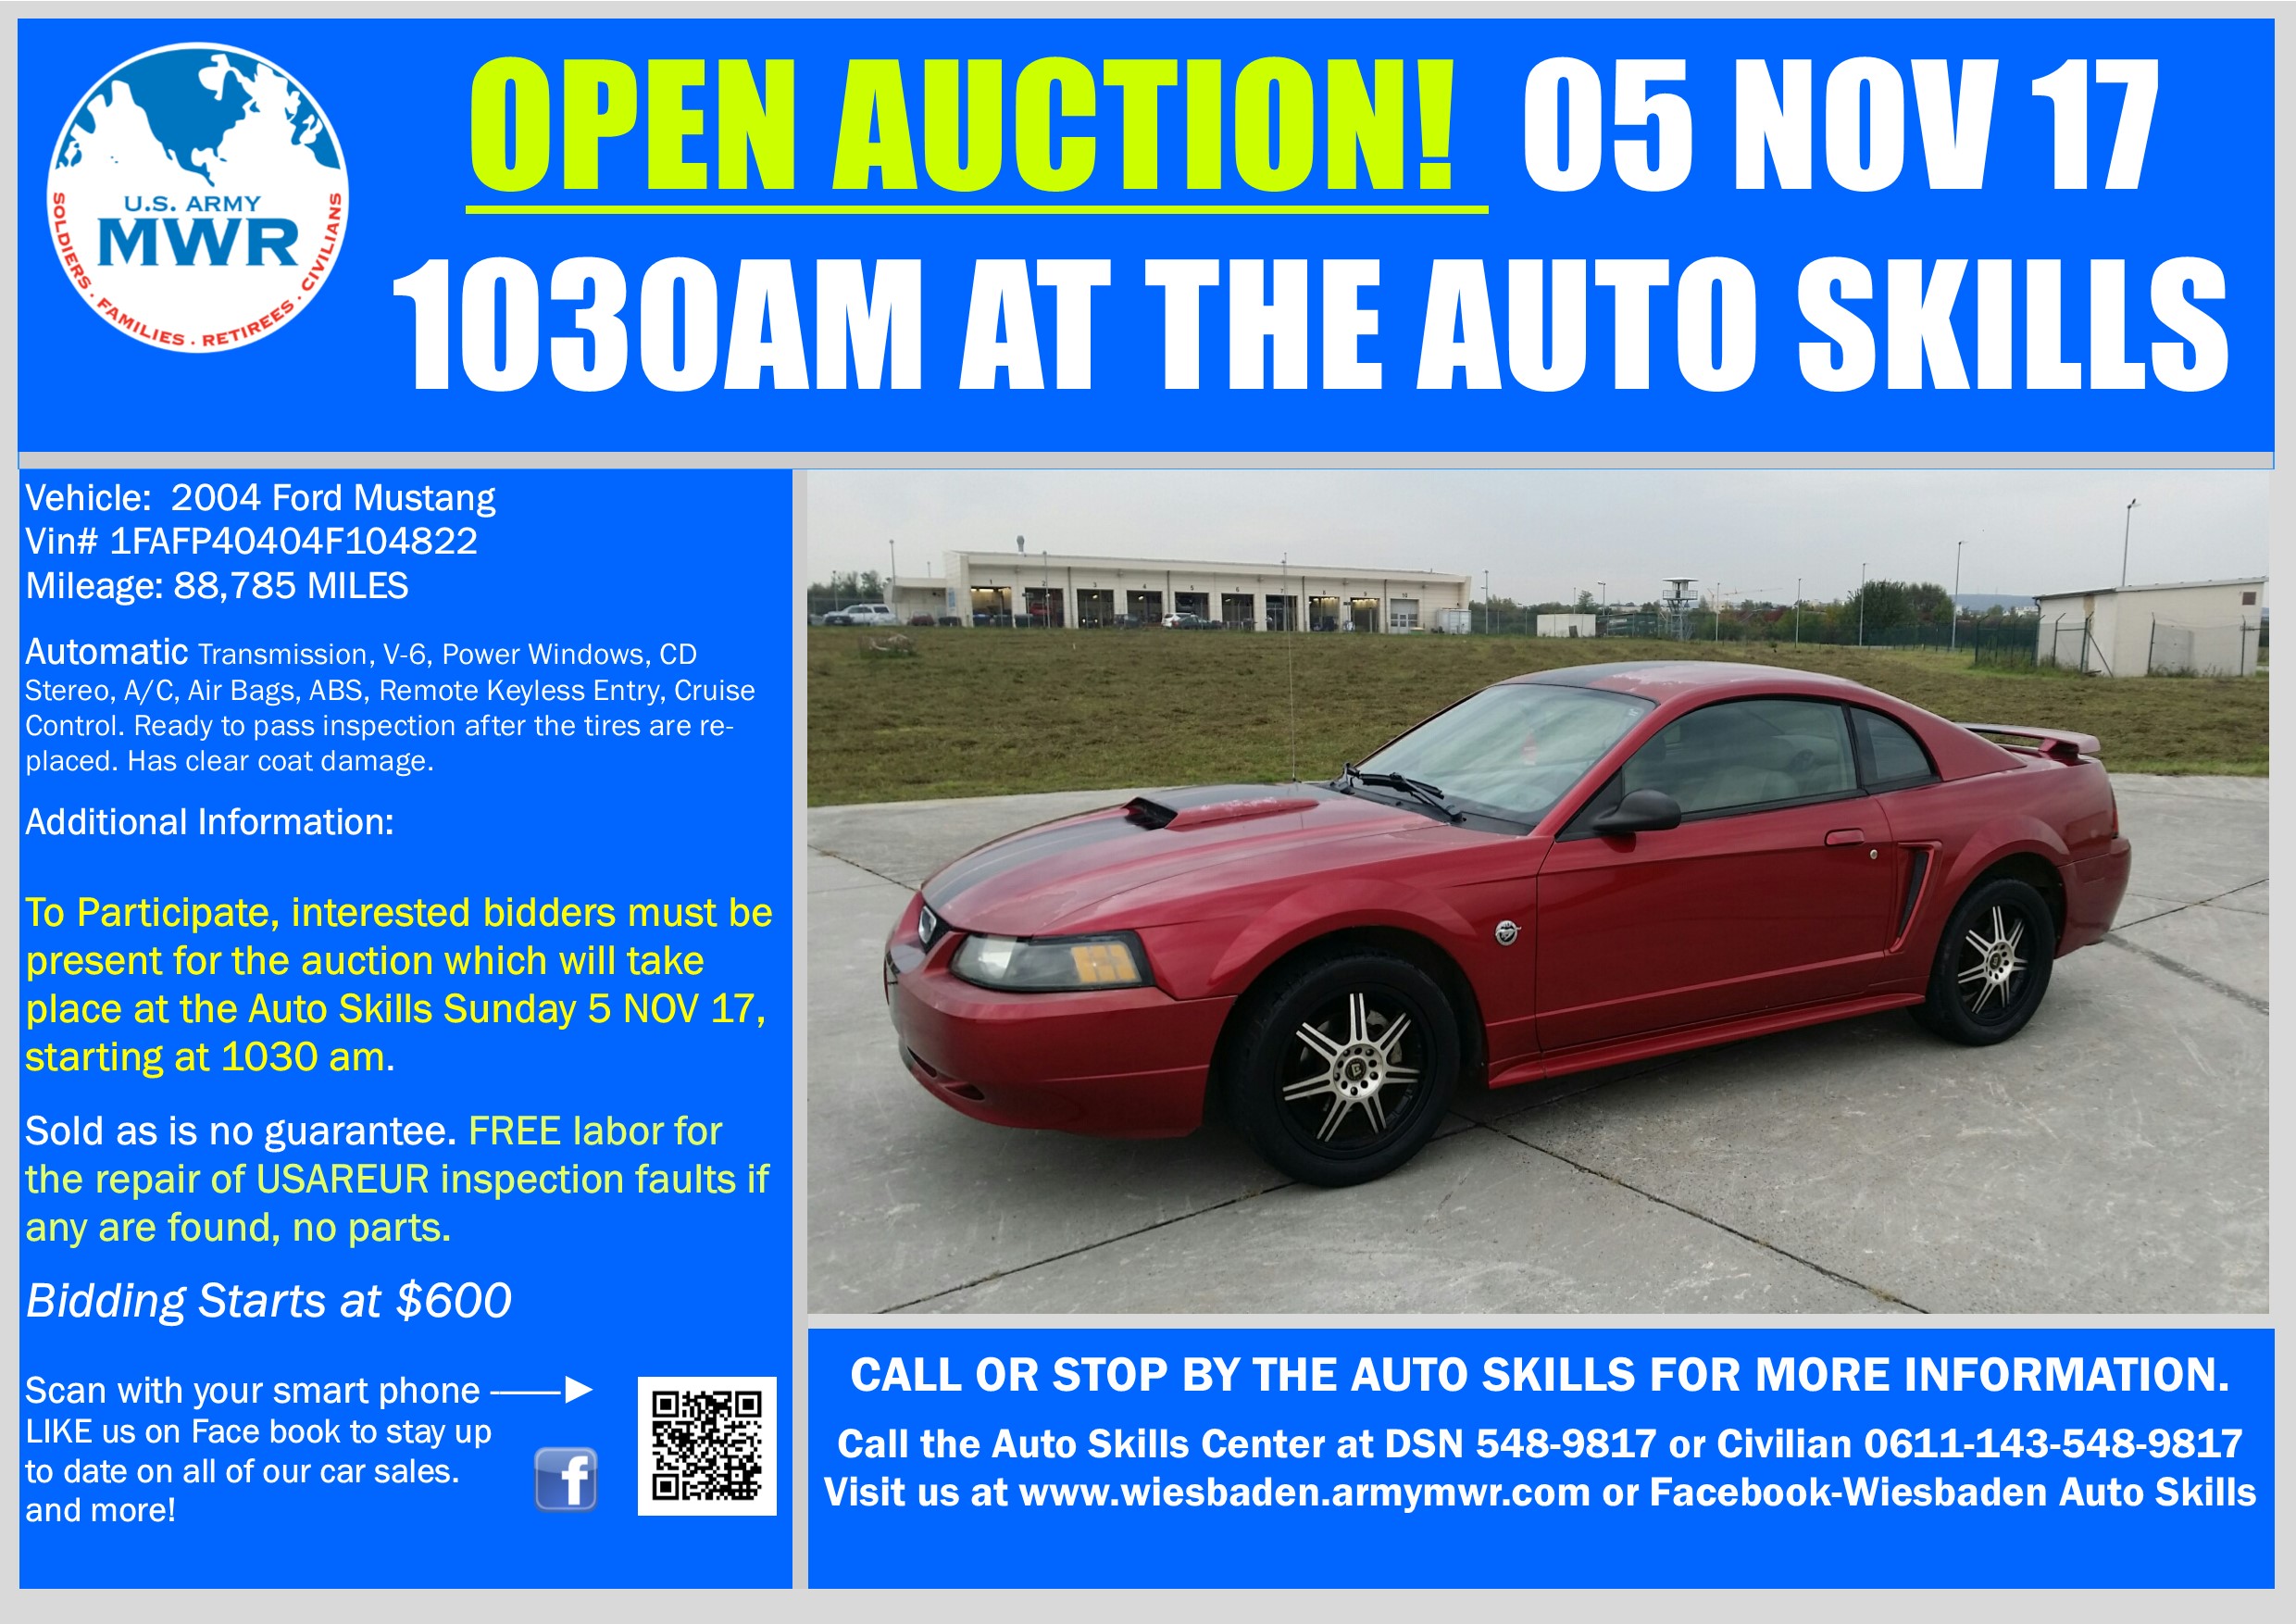 Sale_Ford Mustang  5 Nov 17 Open Auction.jpg